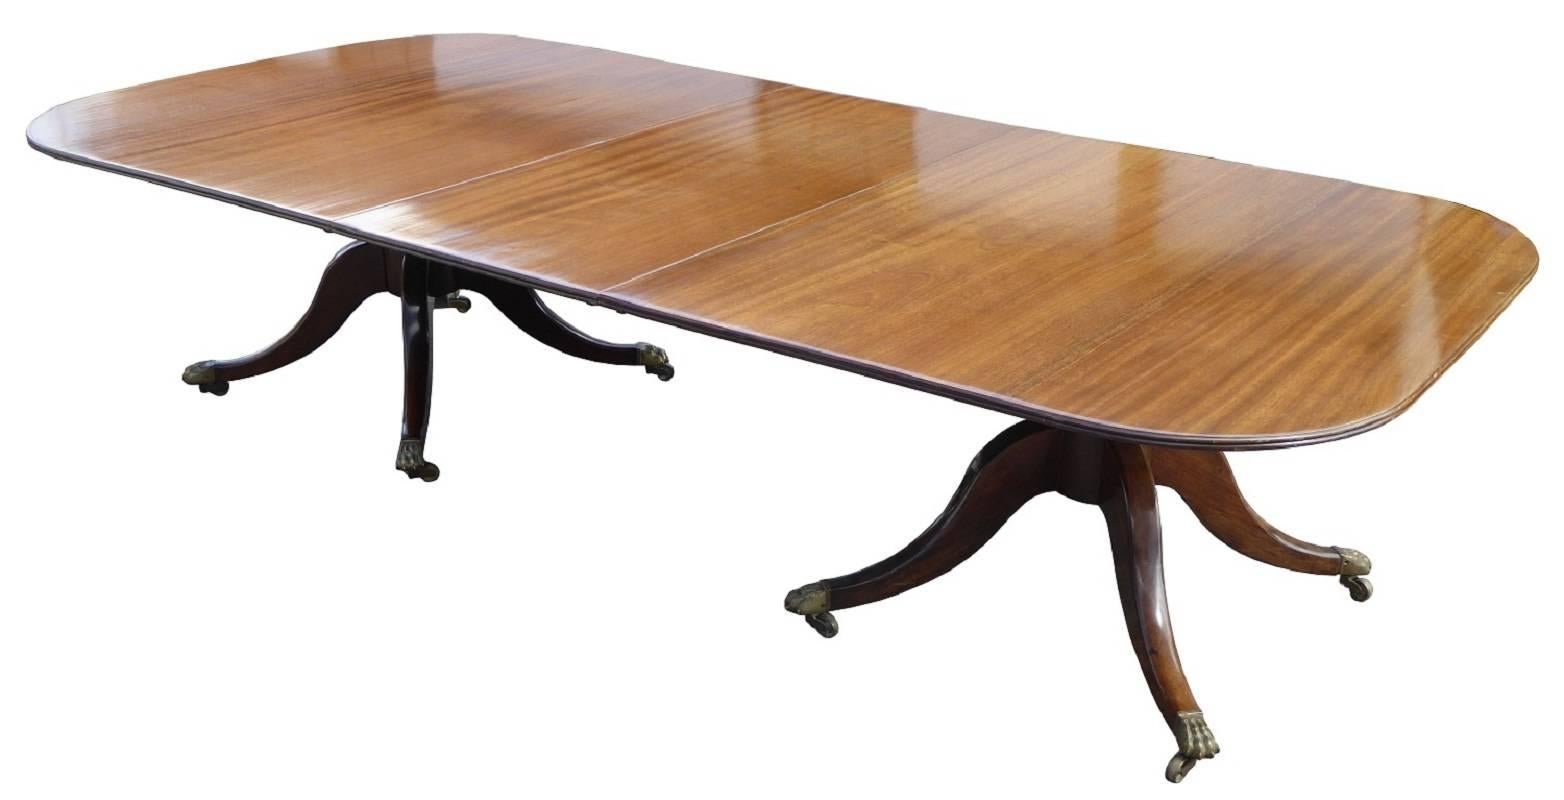 For sale is a good quality, large Regency style dining table. The table has a solid mahogany top, with two additional leaves. The table stands on two pedestals, each with splayed legs terminating on brass lion paw castors. The length of the table